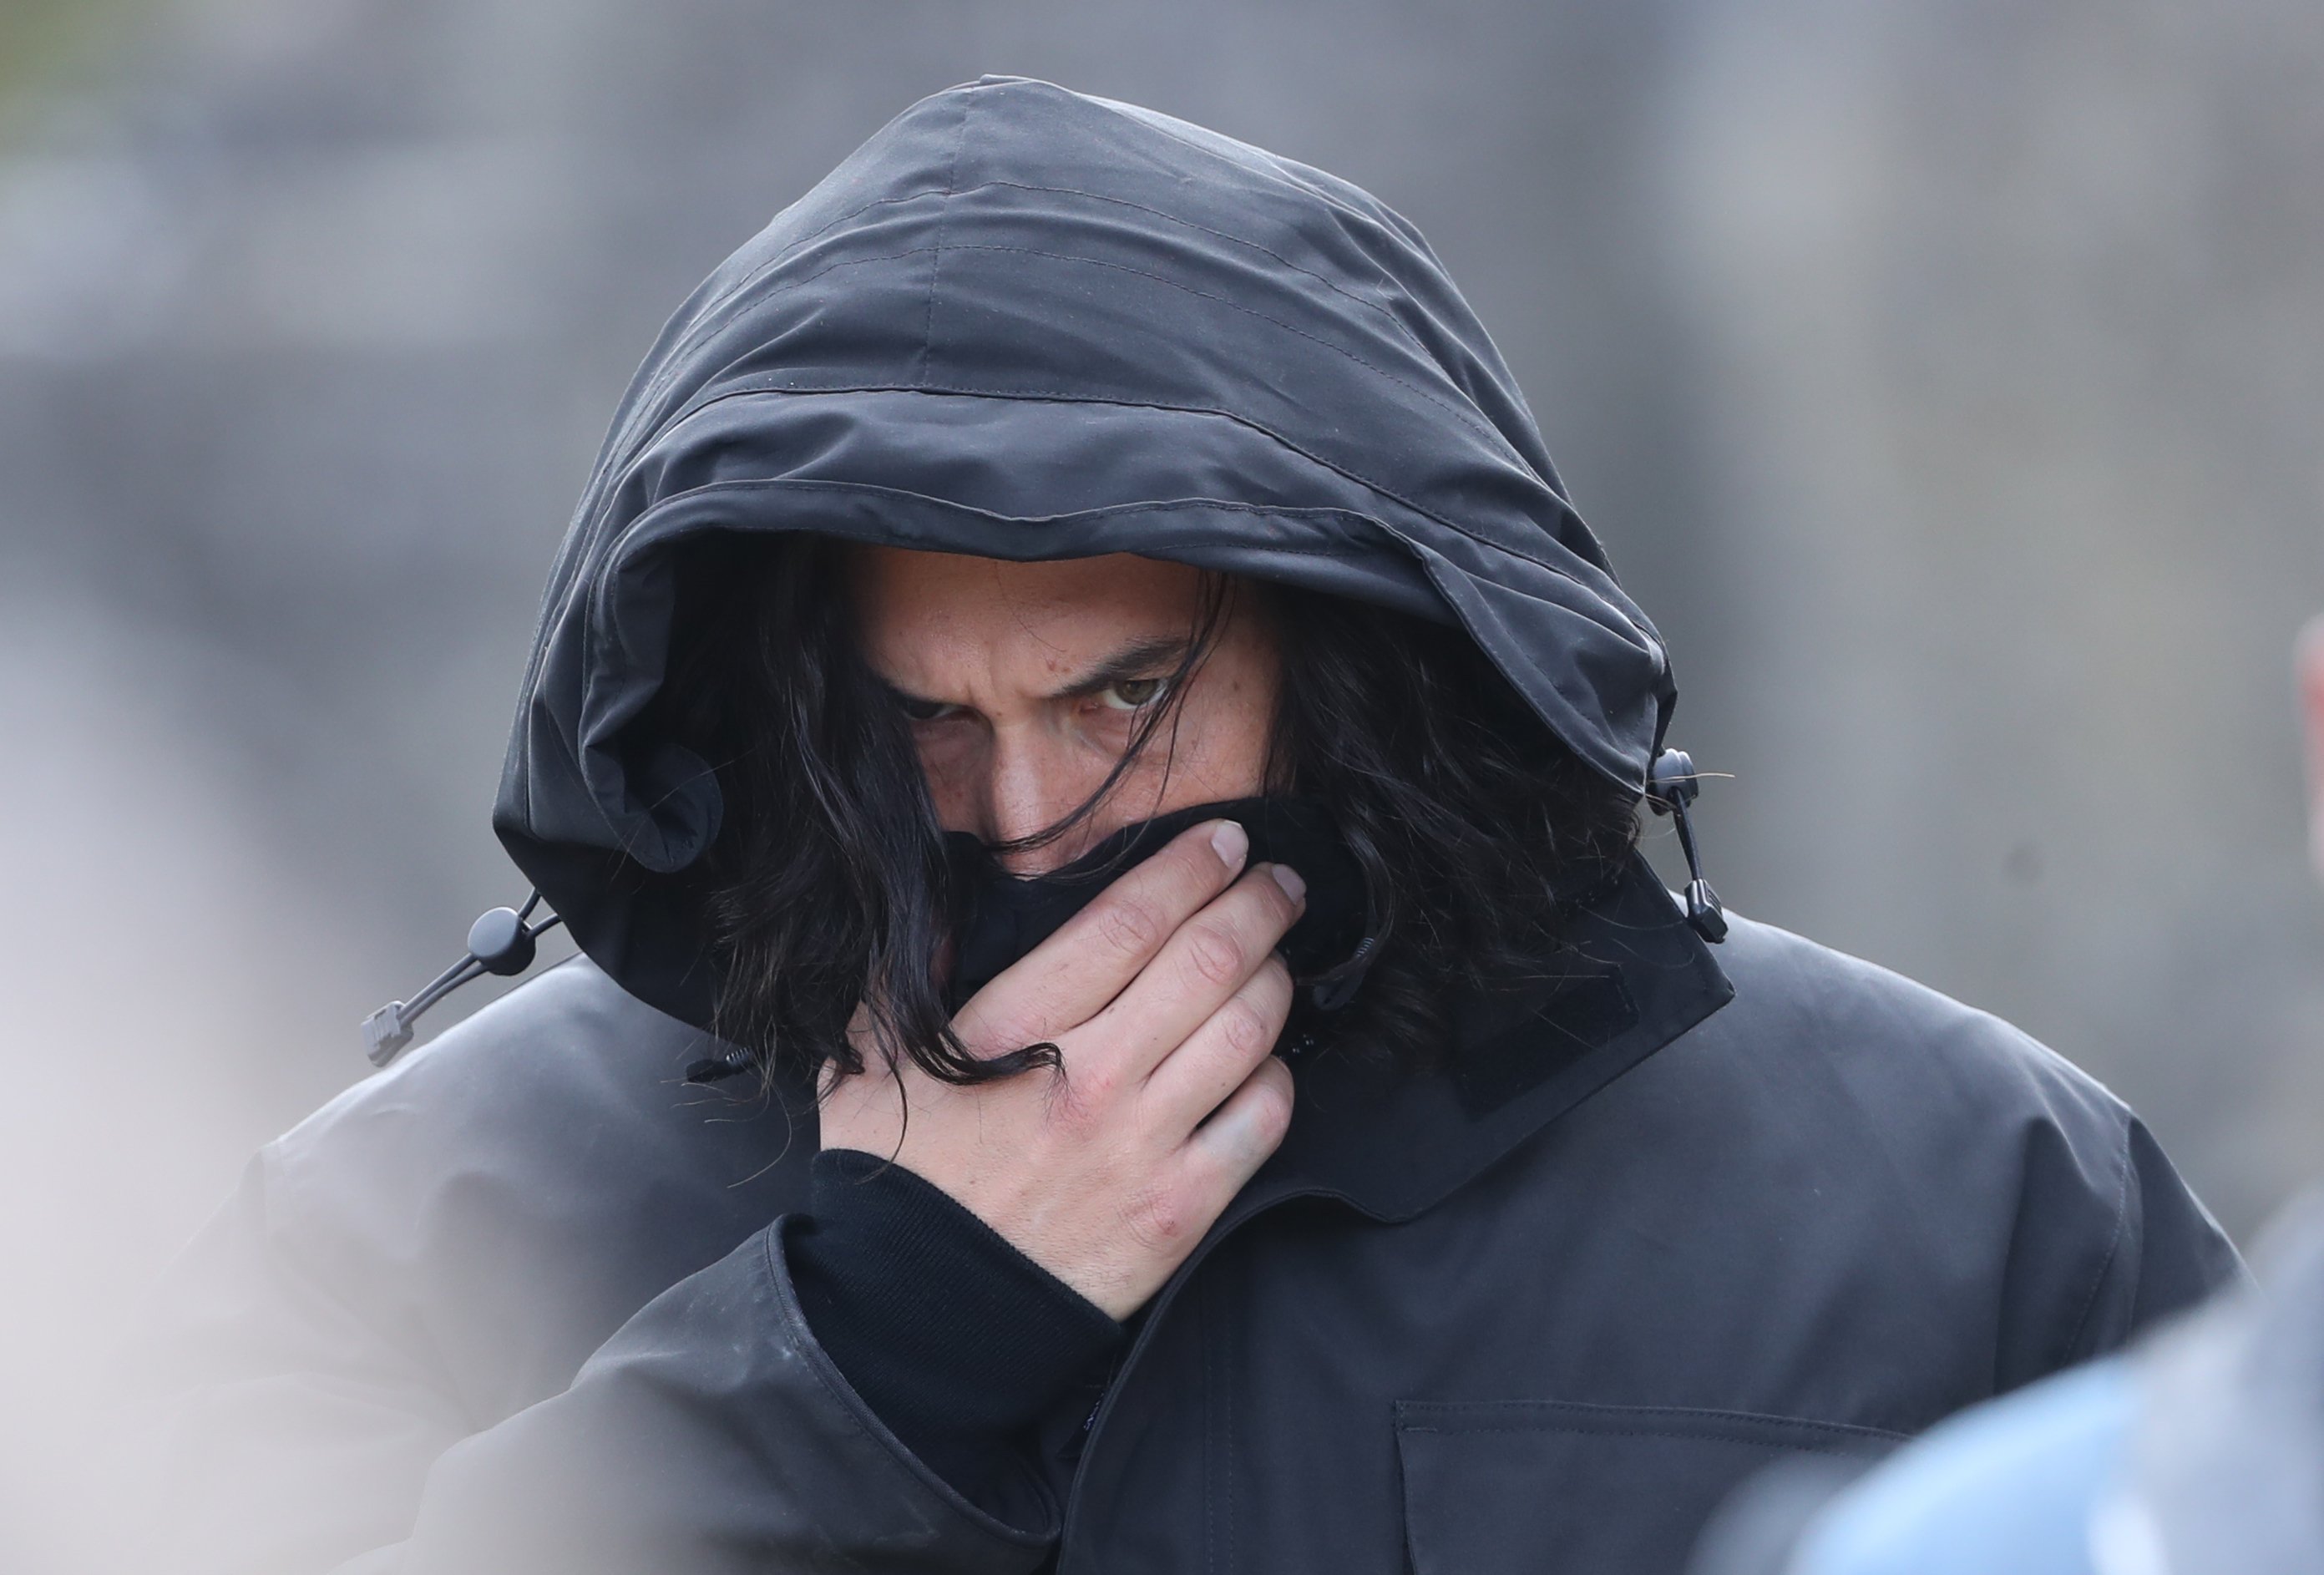 Adam Driver wearing a hooded jacket as he covers his face on the set of 'The Last Duel'